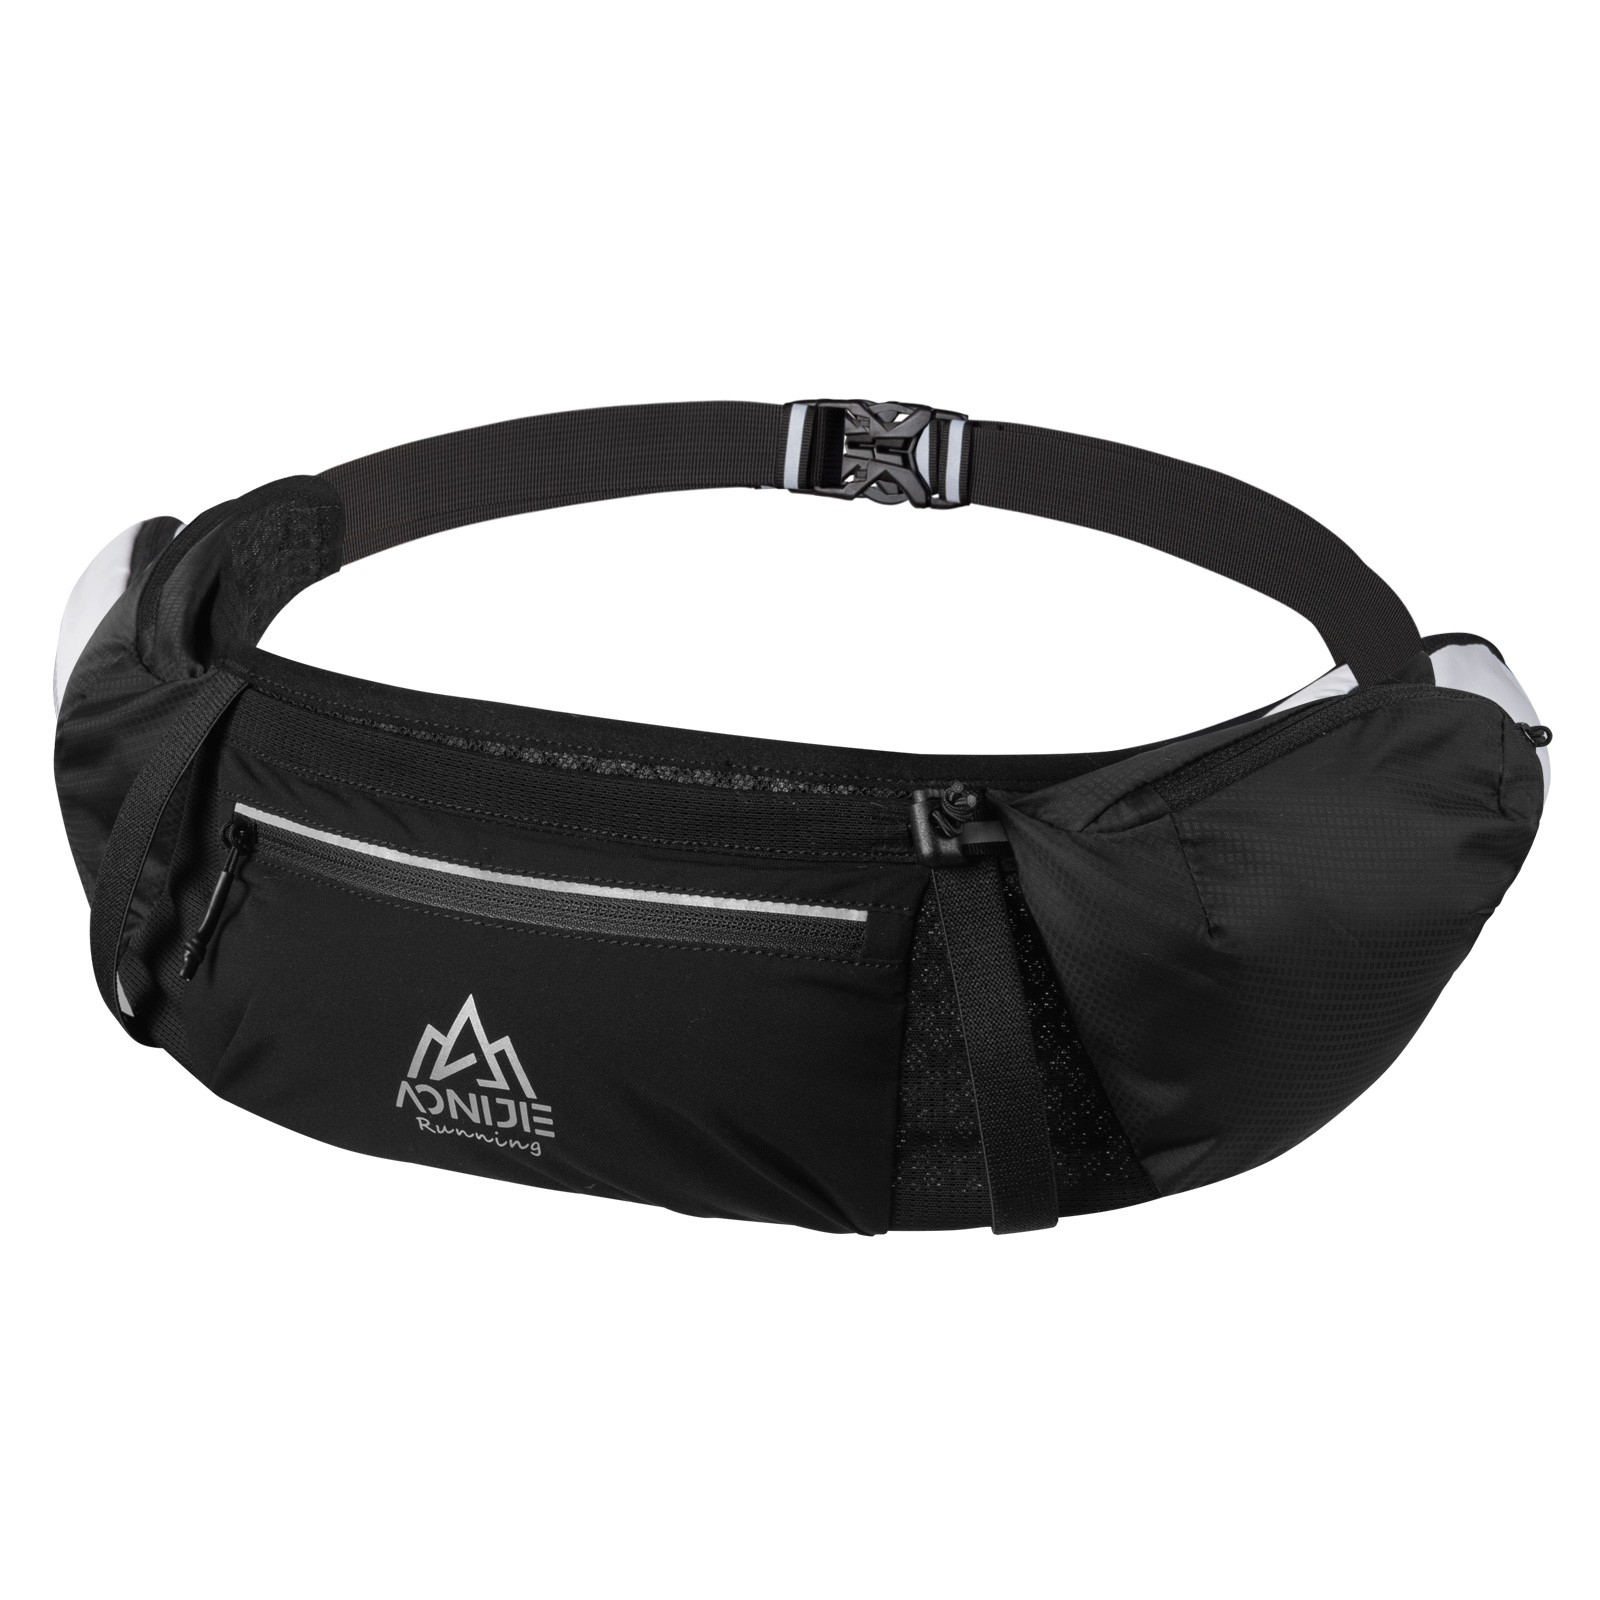 AONIJIE W8113 OEM Black White Sports Waist Bags Outdoor Running Fanny Pack with Pocket Large Capacity Marathon Hiking Waist Bag